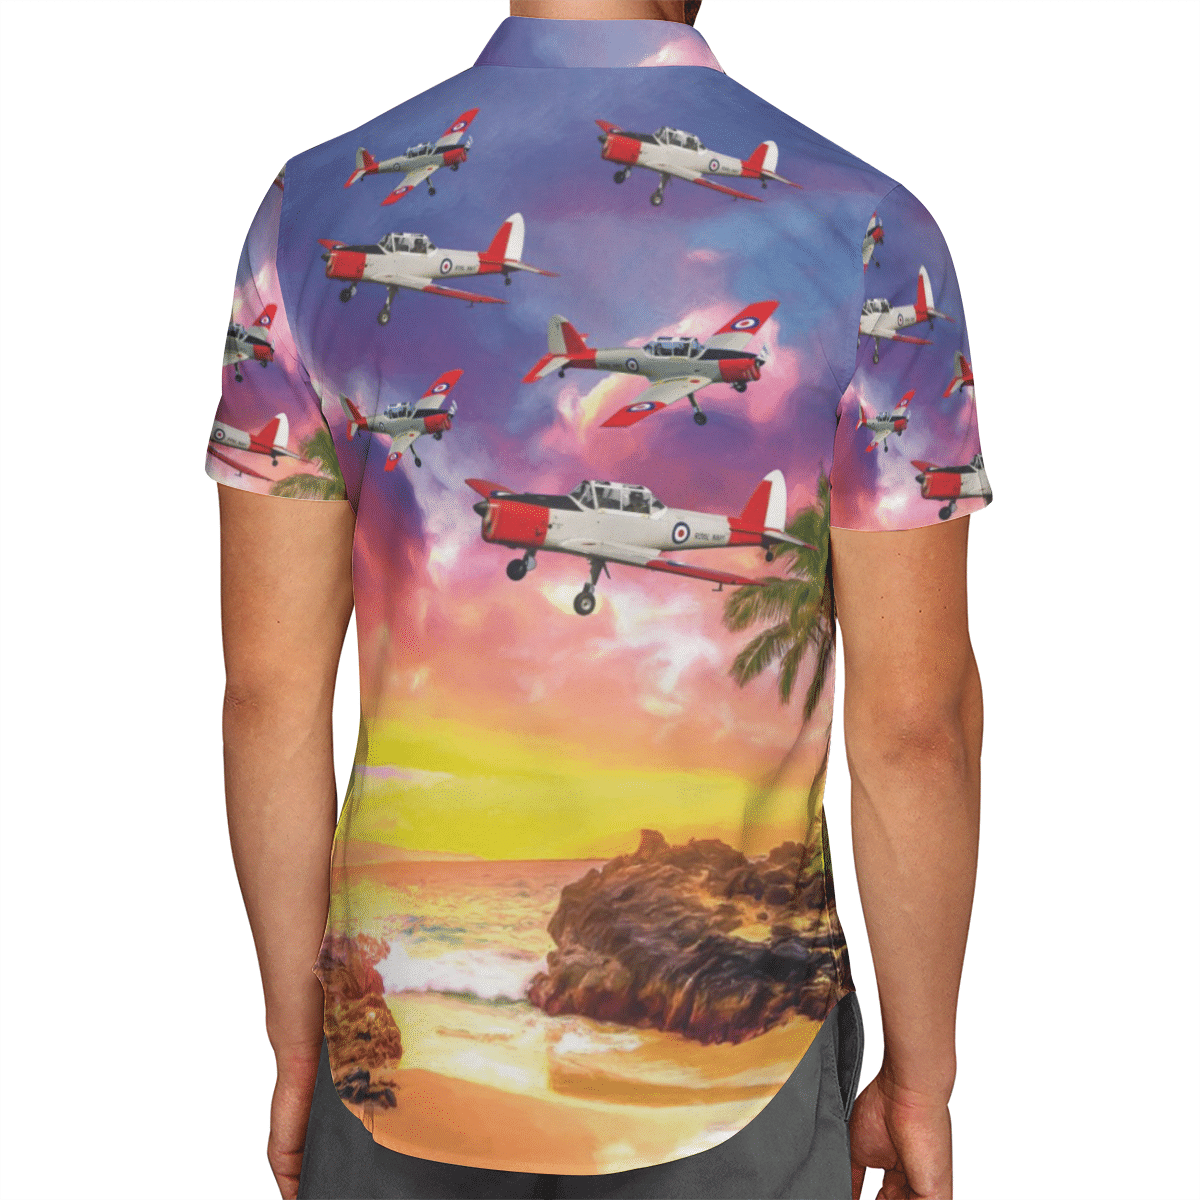 Going to the beach with a quality shirt 141